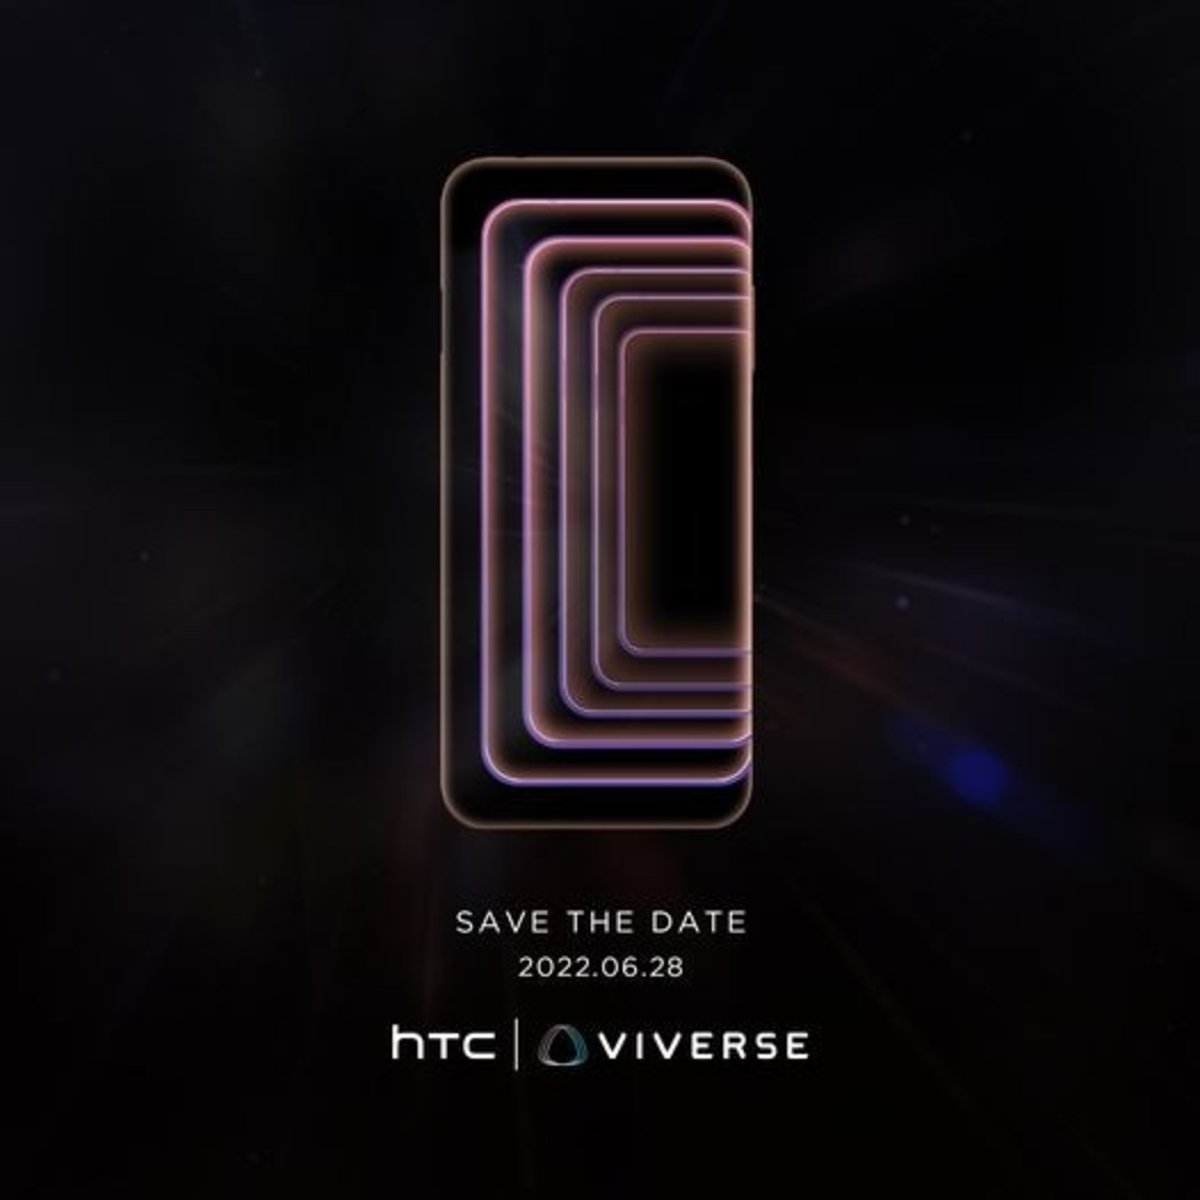 HTC Viverse 'save the date' 28/06/2022